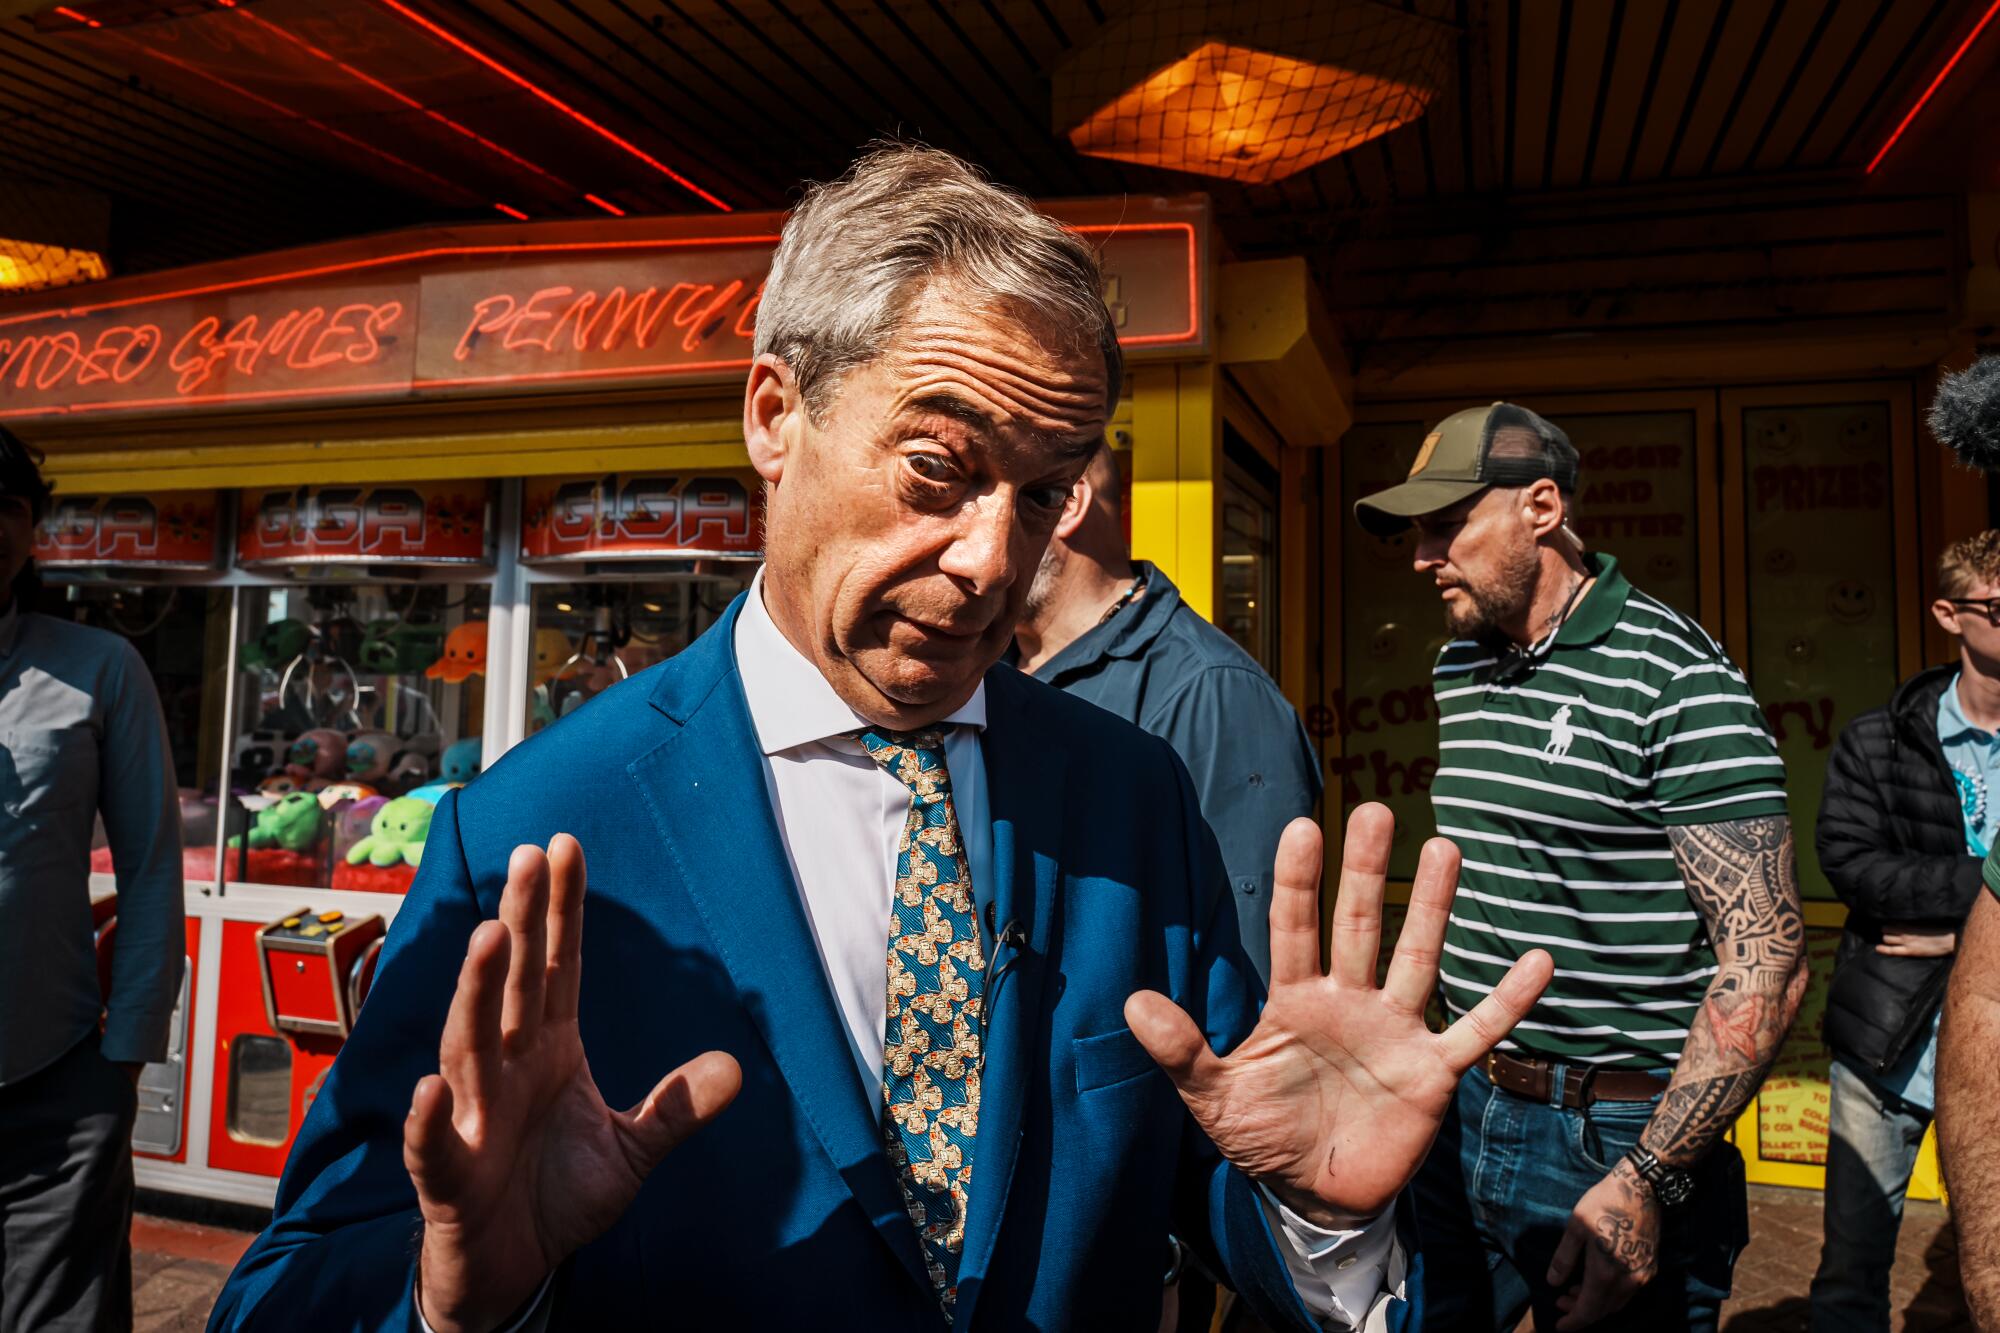 Nigel Farage raises his hands and looks toward the camera during a campaign event in an arcade. 